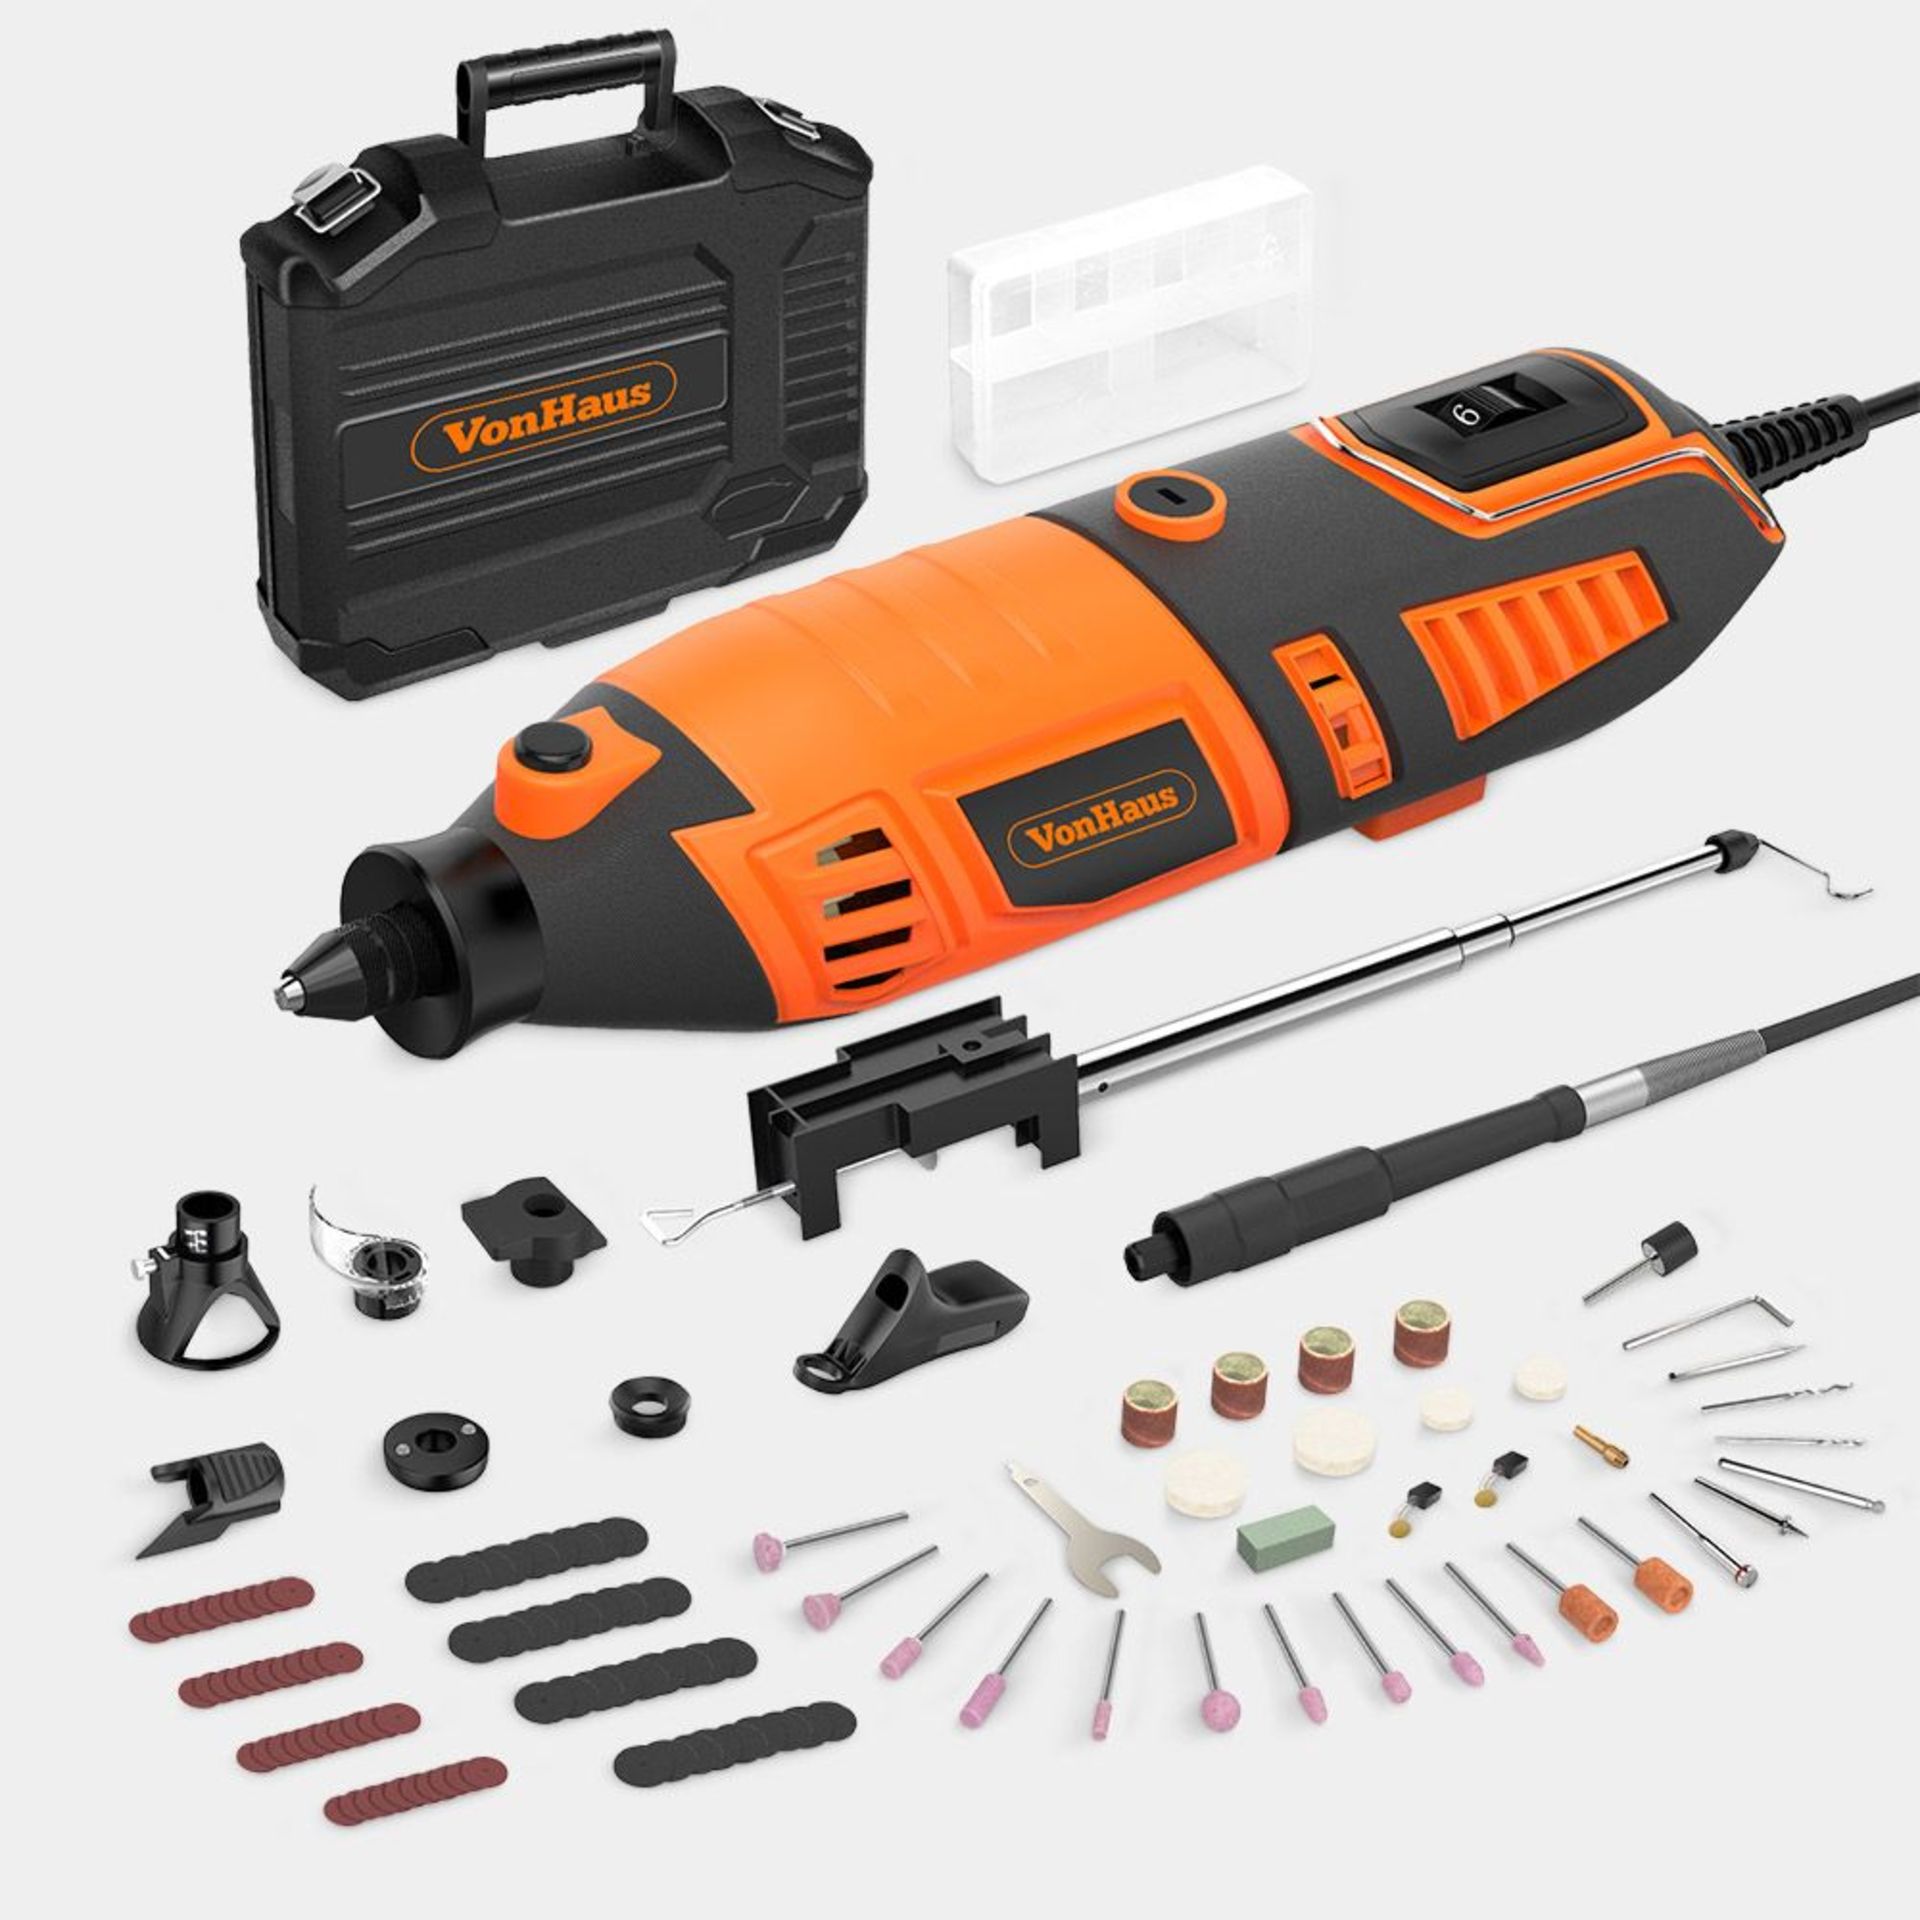 184pc Rotary Multitool Set. - S2. A highly versatile tool, it allows you to carry out precise